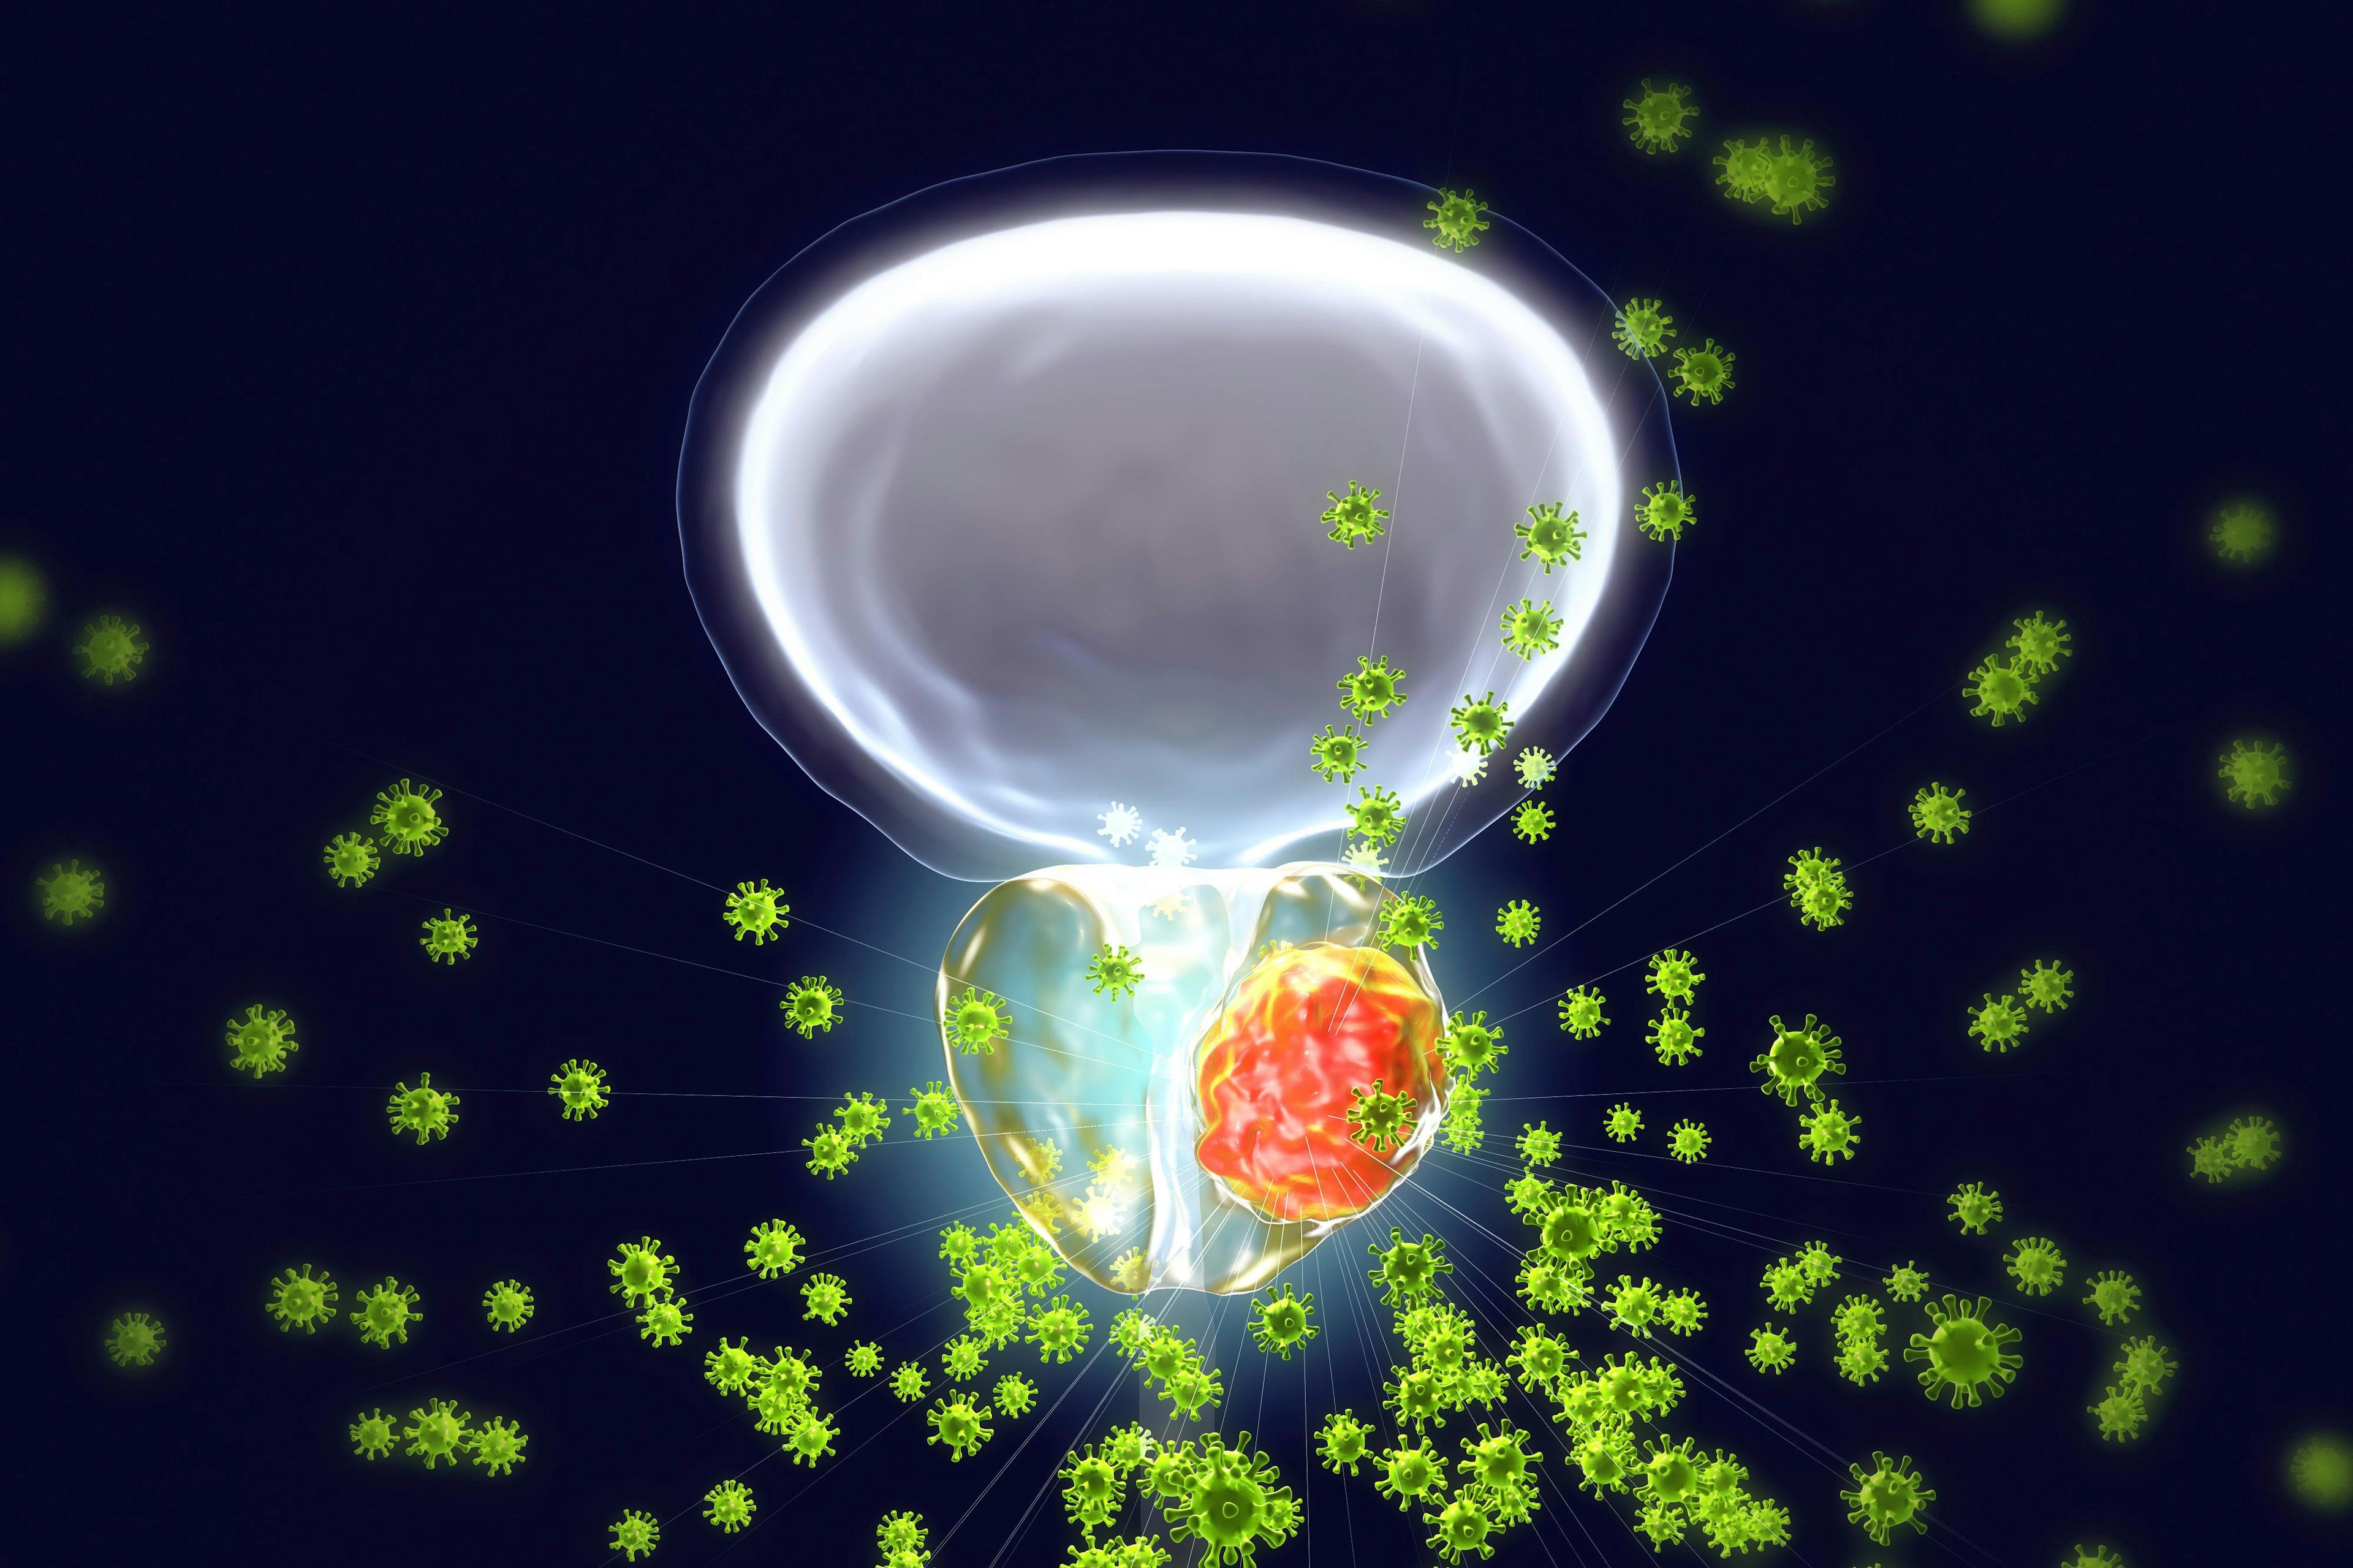 Conceptual image for viral ethiology of prostate cancer. 3D illustration showing viruses infecting prostate gland which develops cancerous tumor: © Dr_Microbe - stock.adobe.com